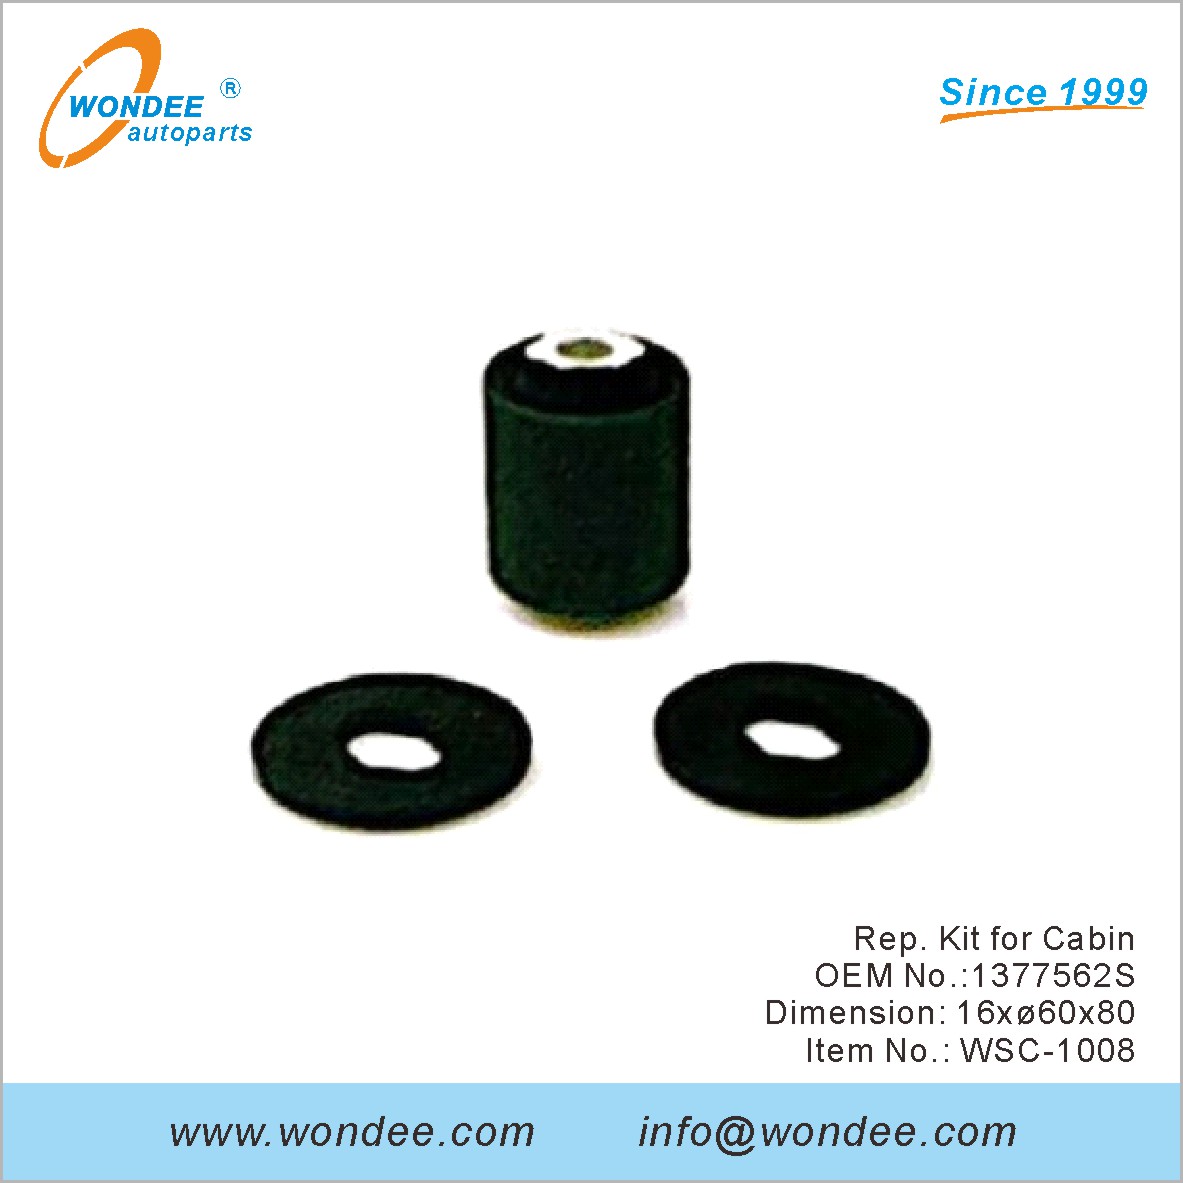 Rep. Kit for Cabin OEM 1377562S from WONDEE